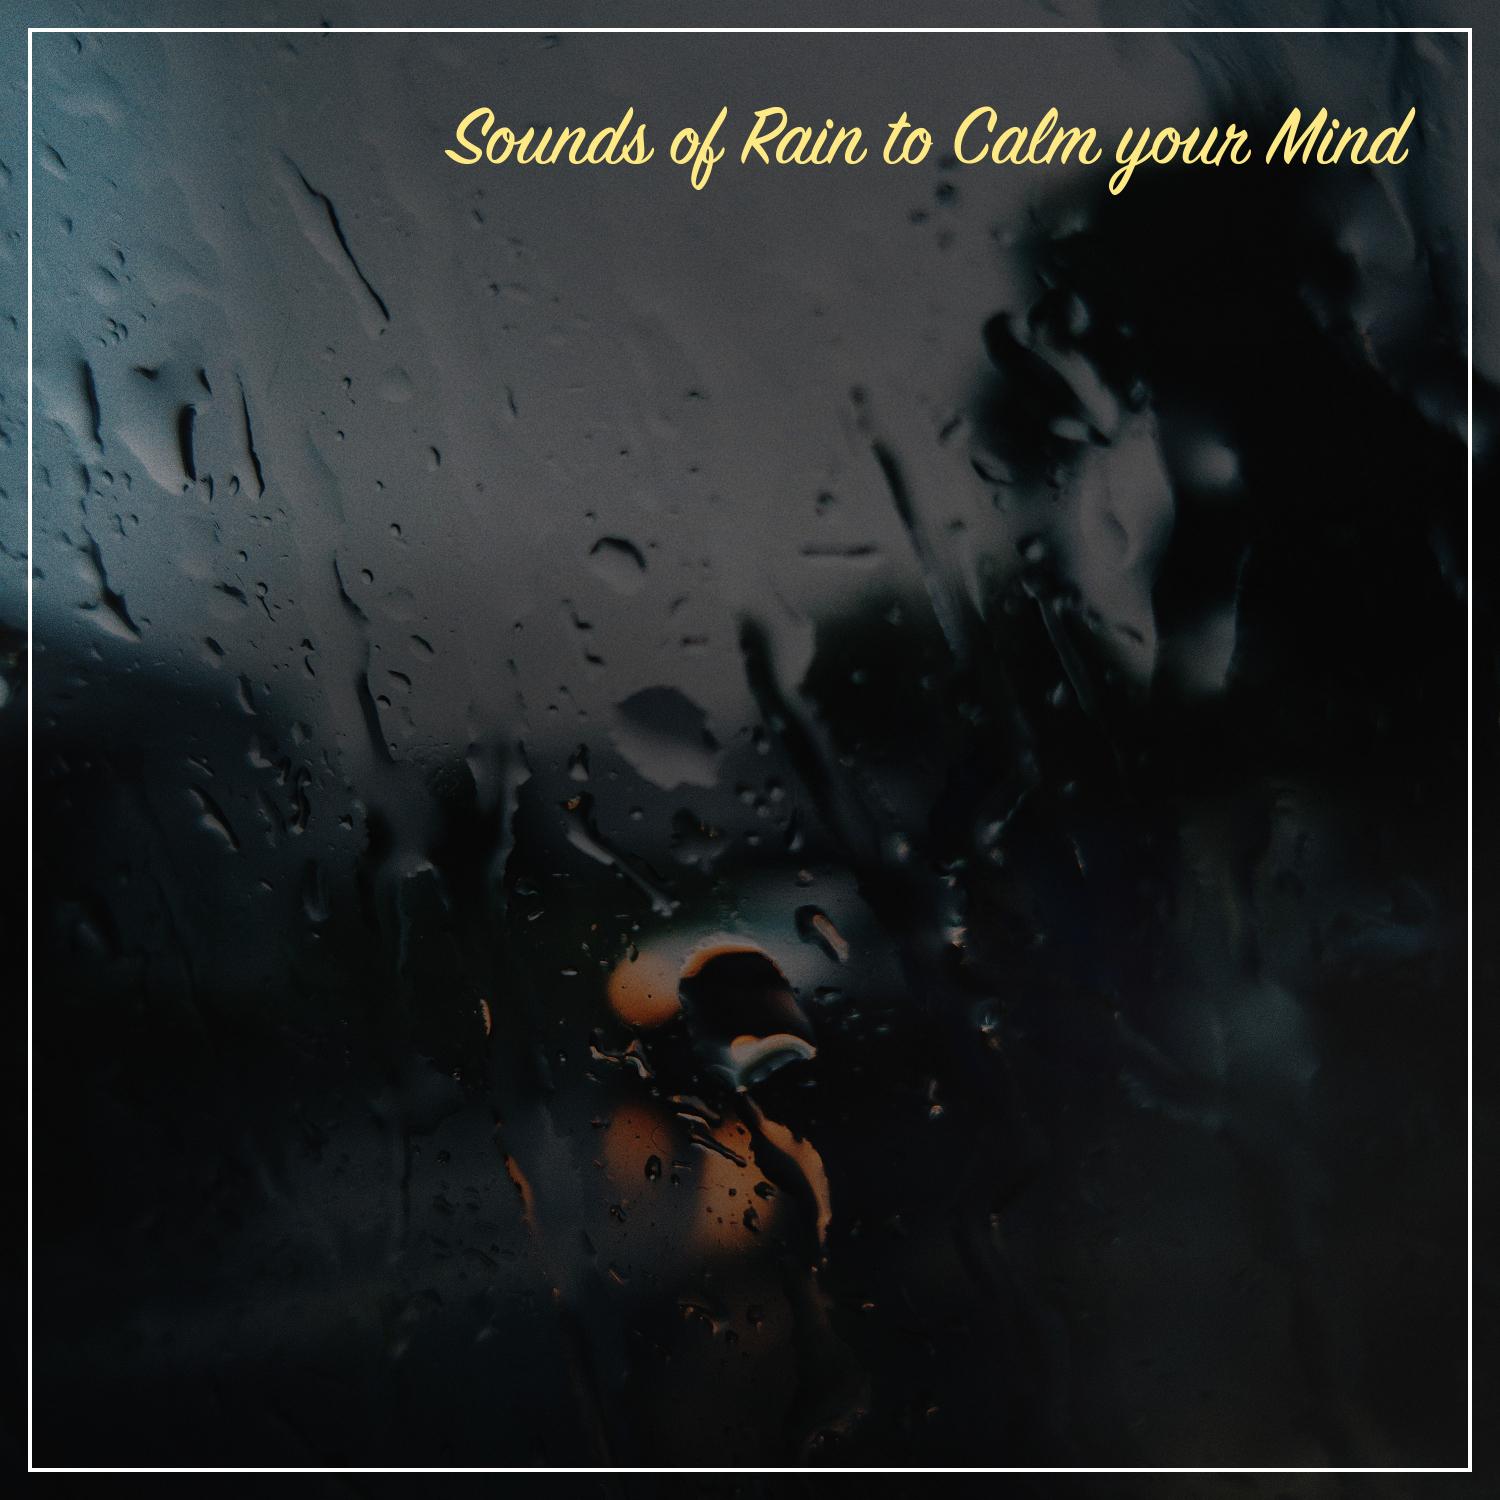 #19 Sounds of Rain to Calm your Mind and Relax